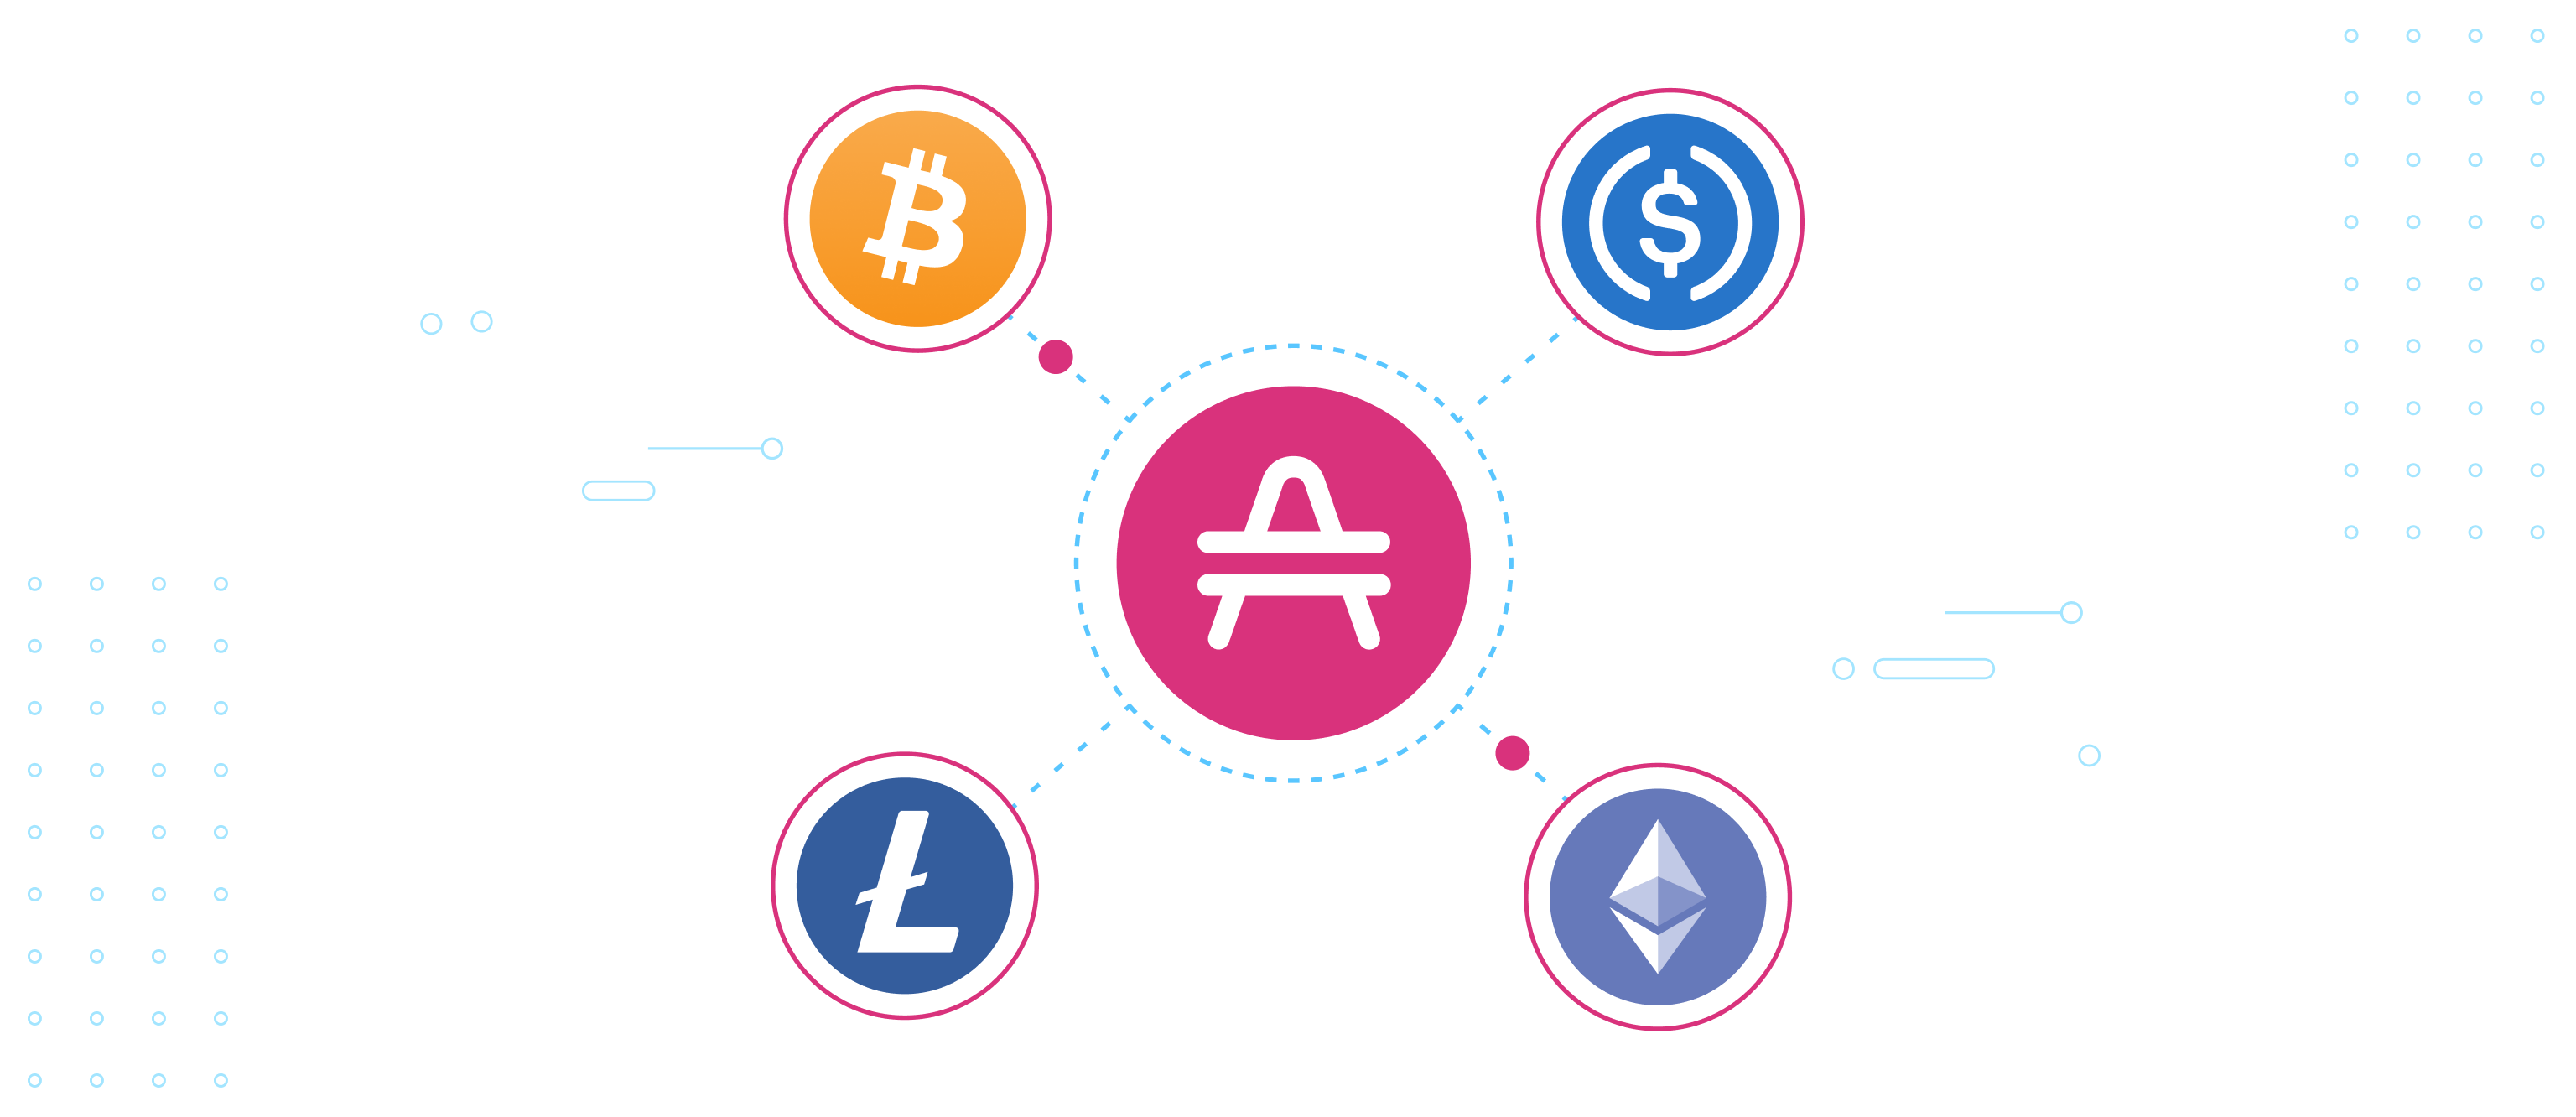 Cryptocurrency logos with AMP in the middle